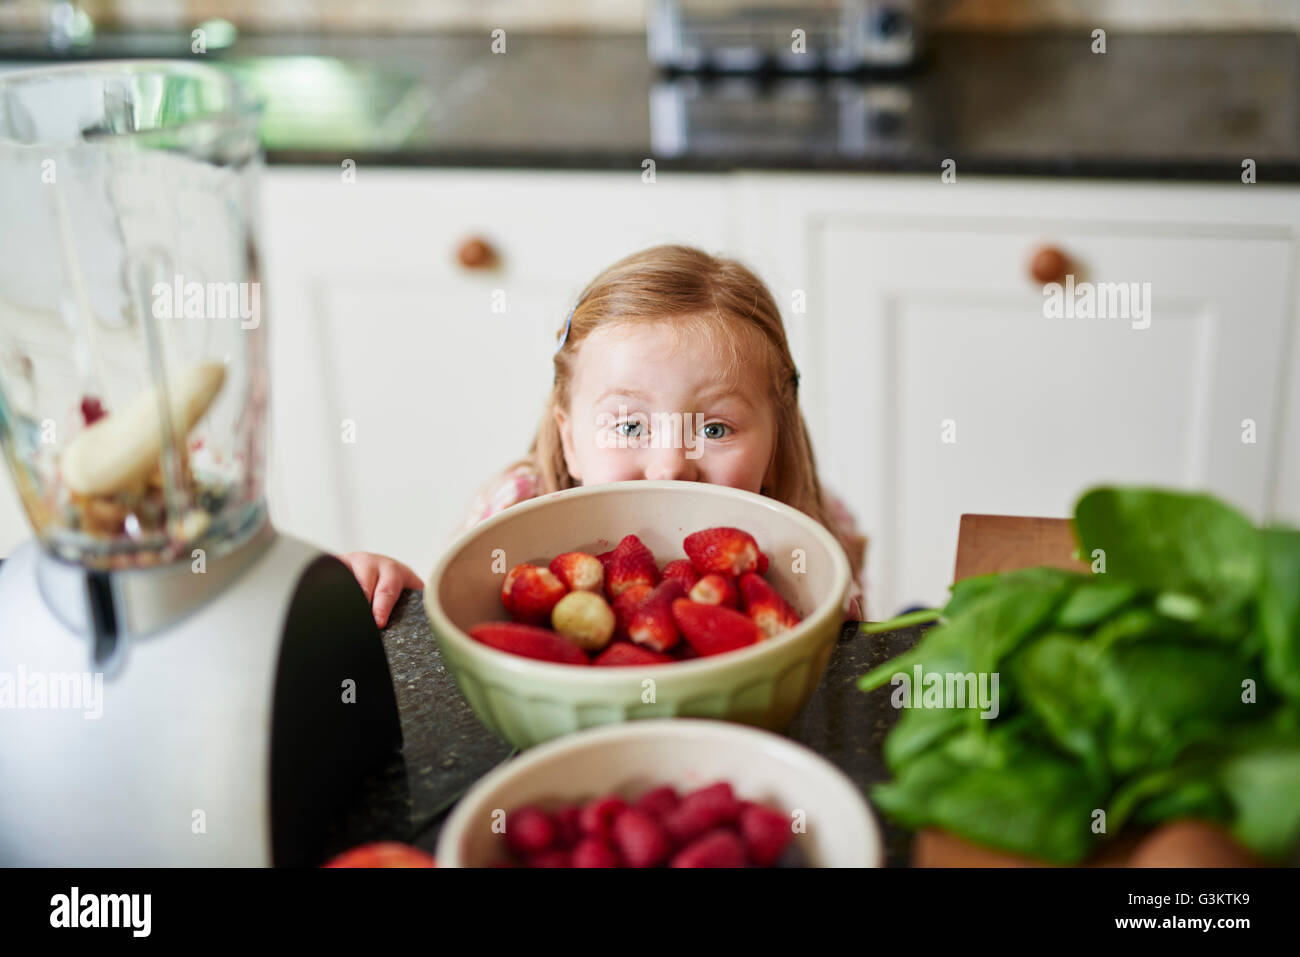 Girl peeking over bowls of strawberries of kitchen counter Stock Photo